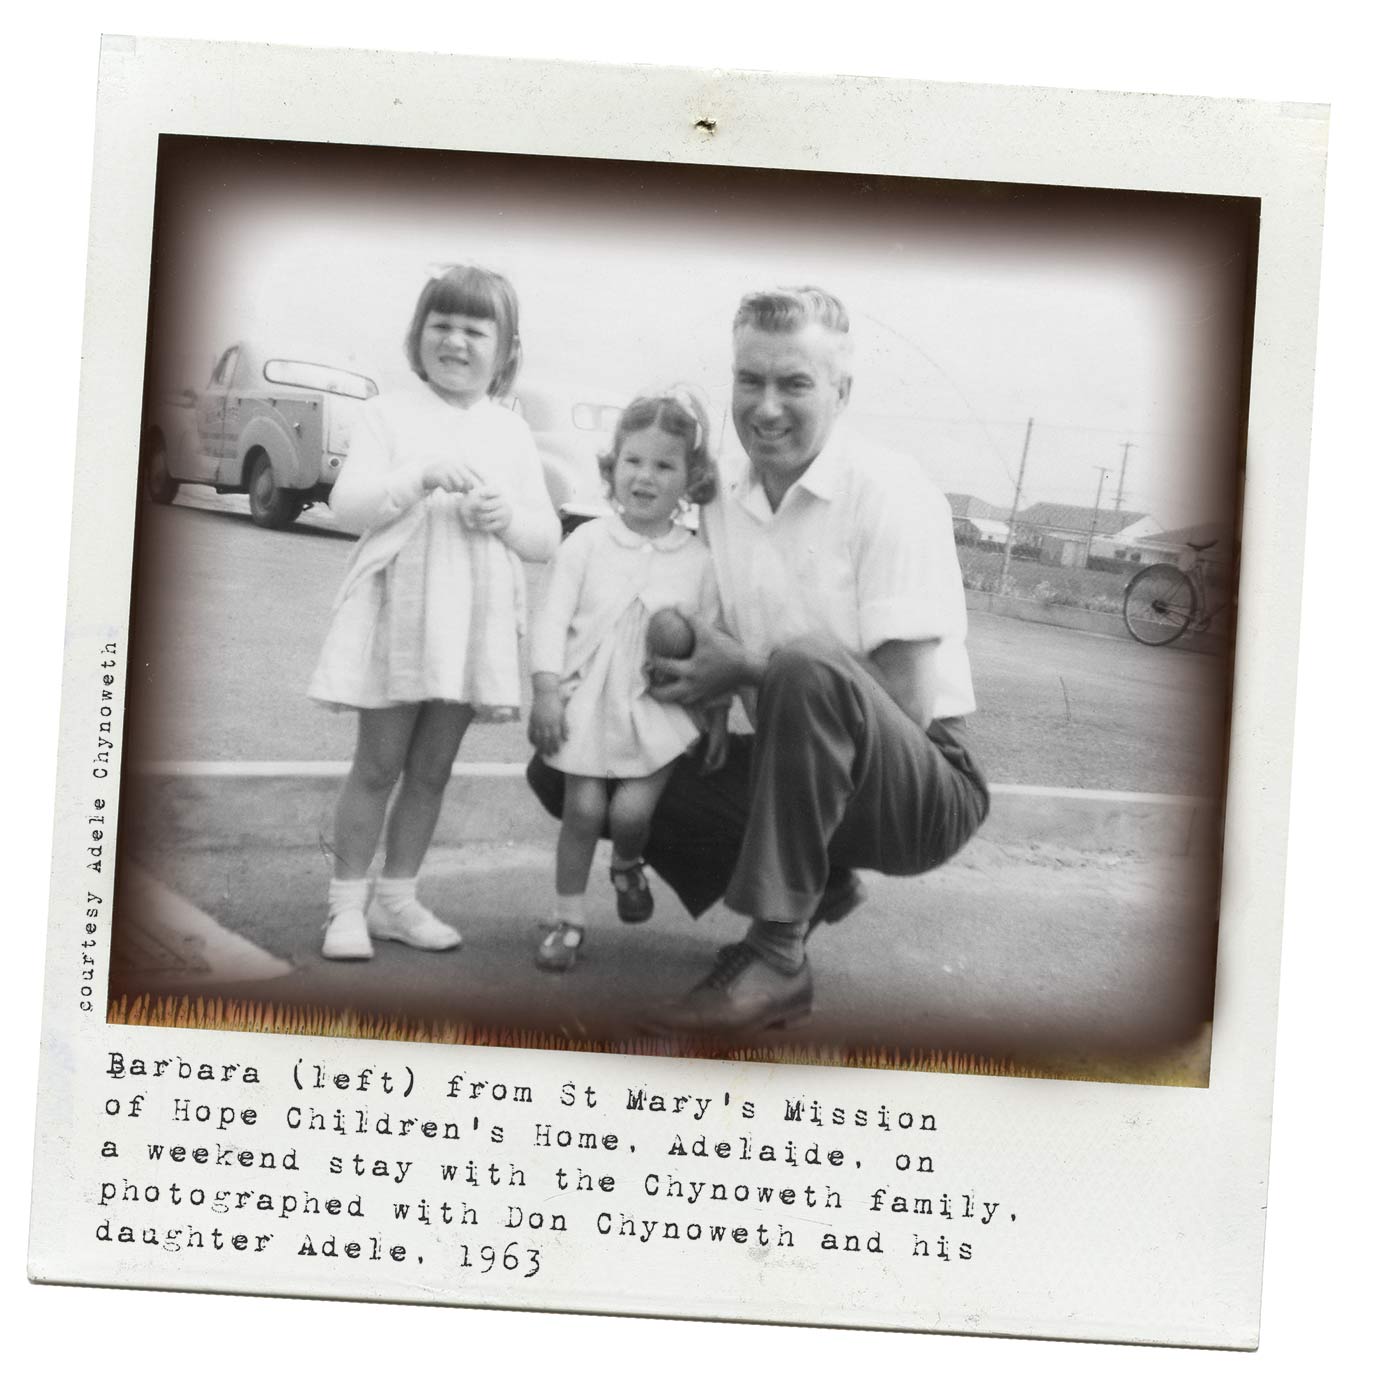 A black and white Polaroid photograph of a man with two little girls. The man is crouched down to be at the same level as the girls and all are smiling at the camera. Typewritten text underneath reads 'Barbara (left) from St Mary's Mission of Hope Children's Home, Adelaide, on a weekend stay with the Chynoweth family, photographed with Don Chynoweth and his daughter Adele. 1963'. Smaller text, on the left-hand side of the image, in a vertical direction, reads 'Courtesy Adele Chynoweth'. - click to view larger image